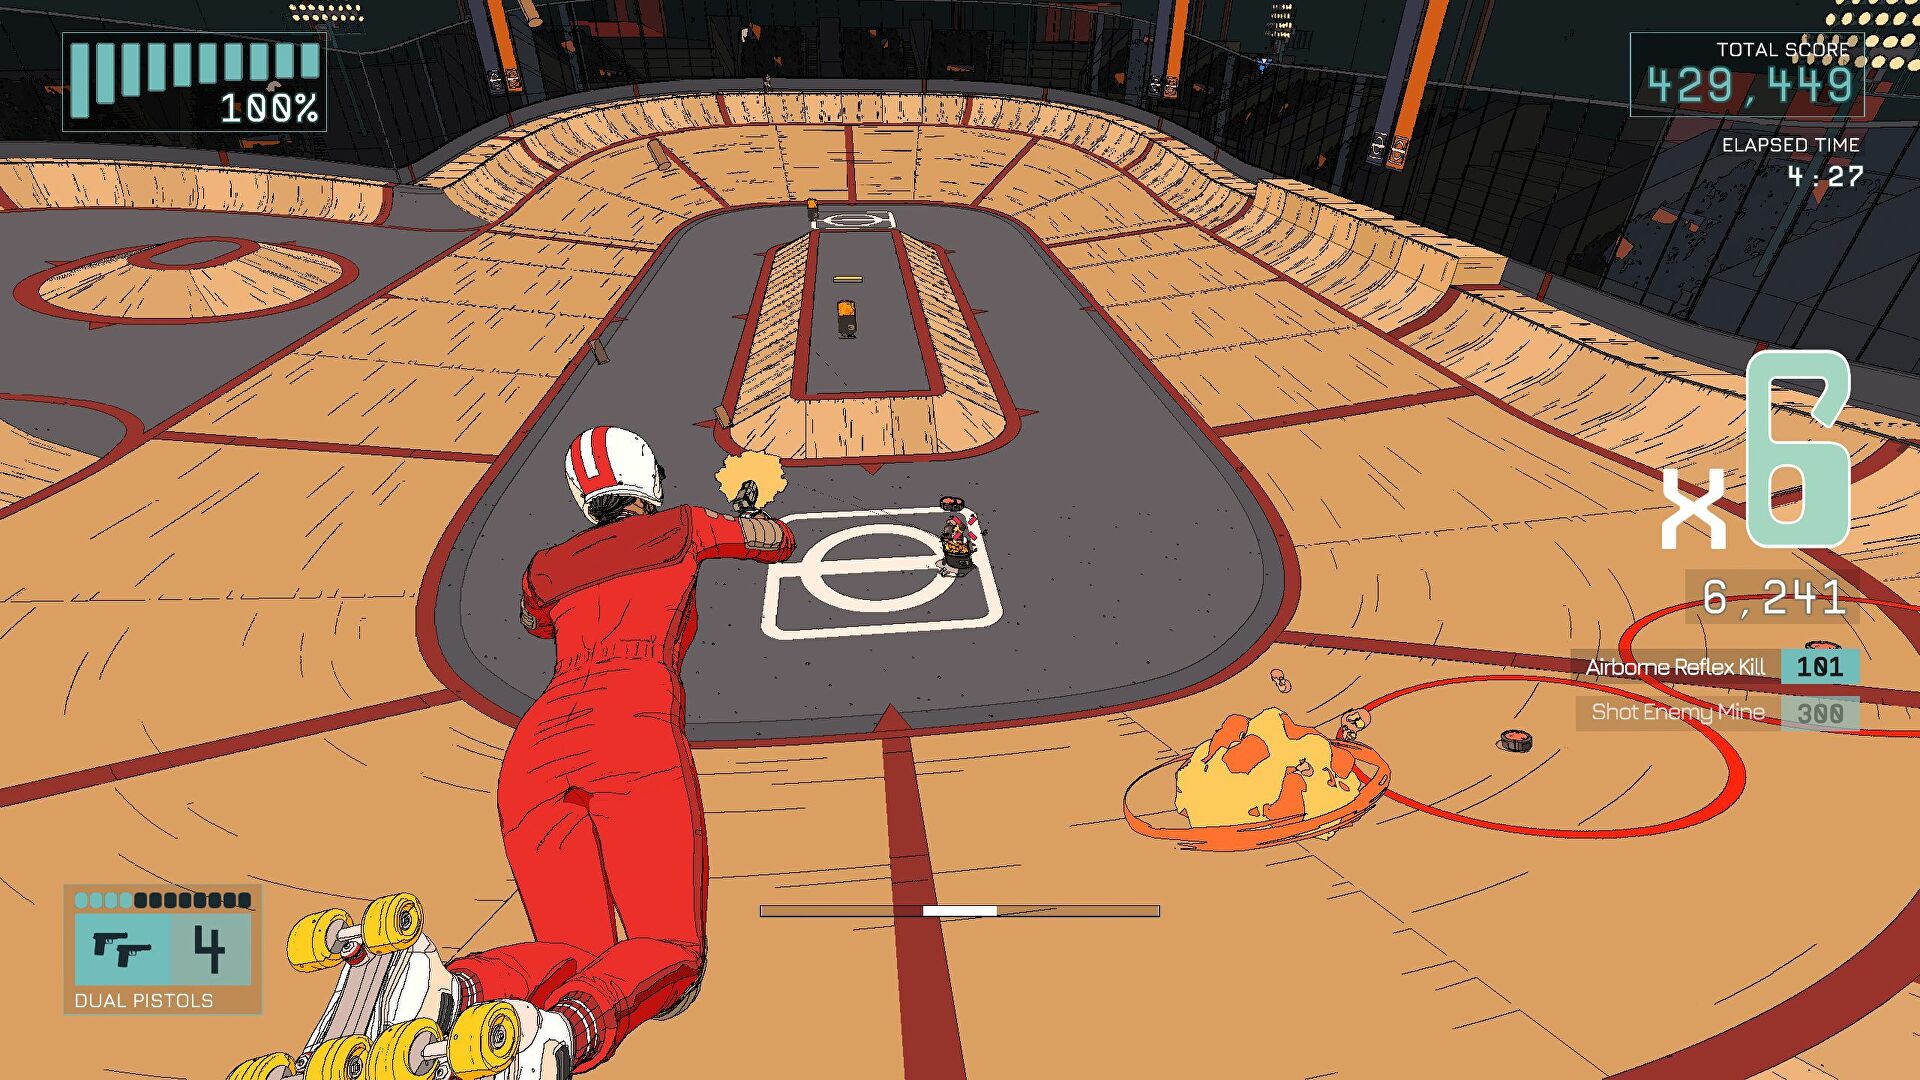 Rollerdrome’s smooth, bullet time bloodsport is locked and loaded